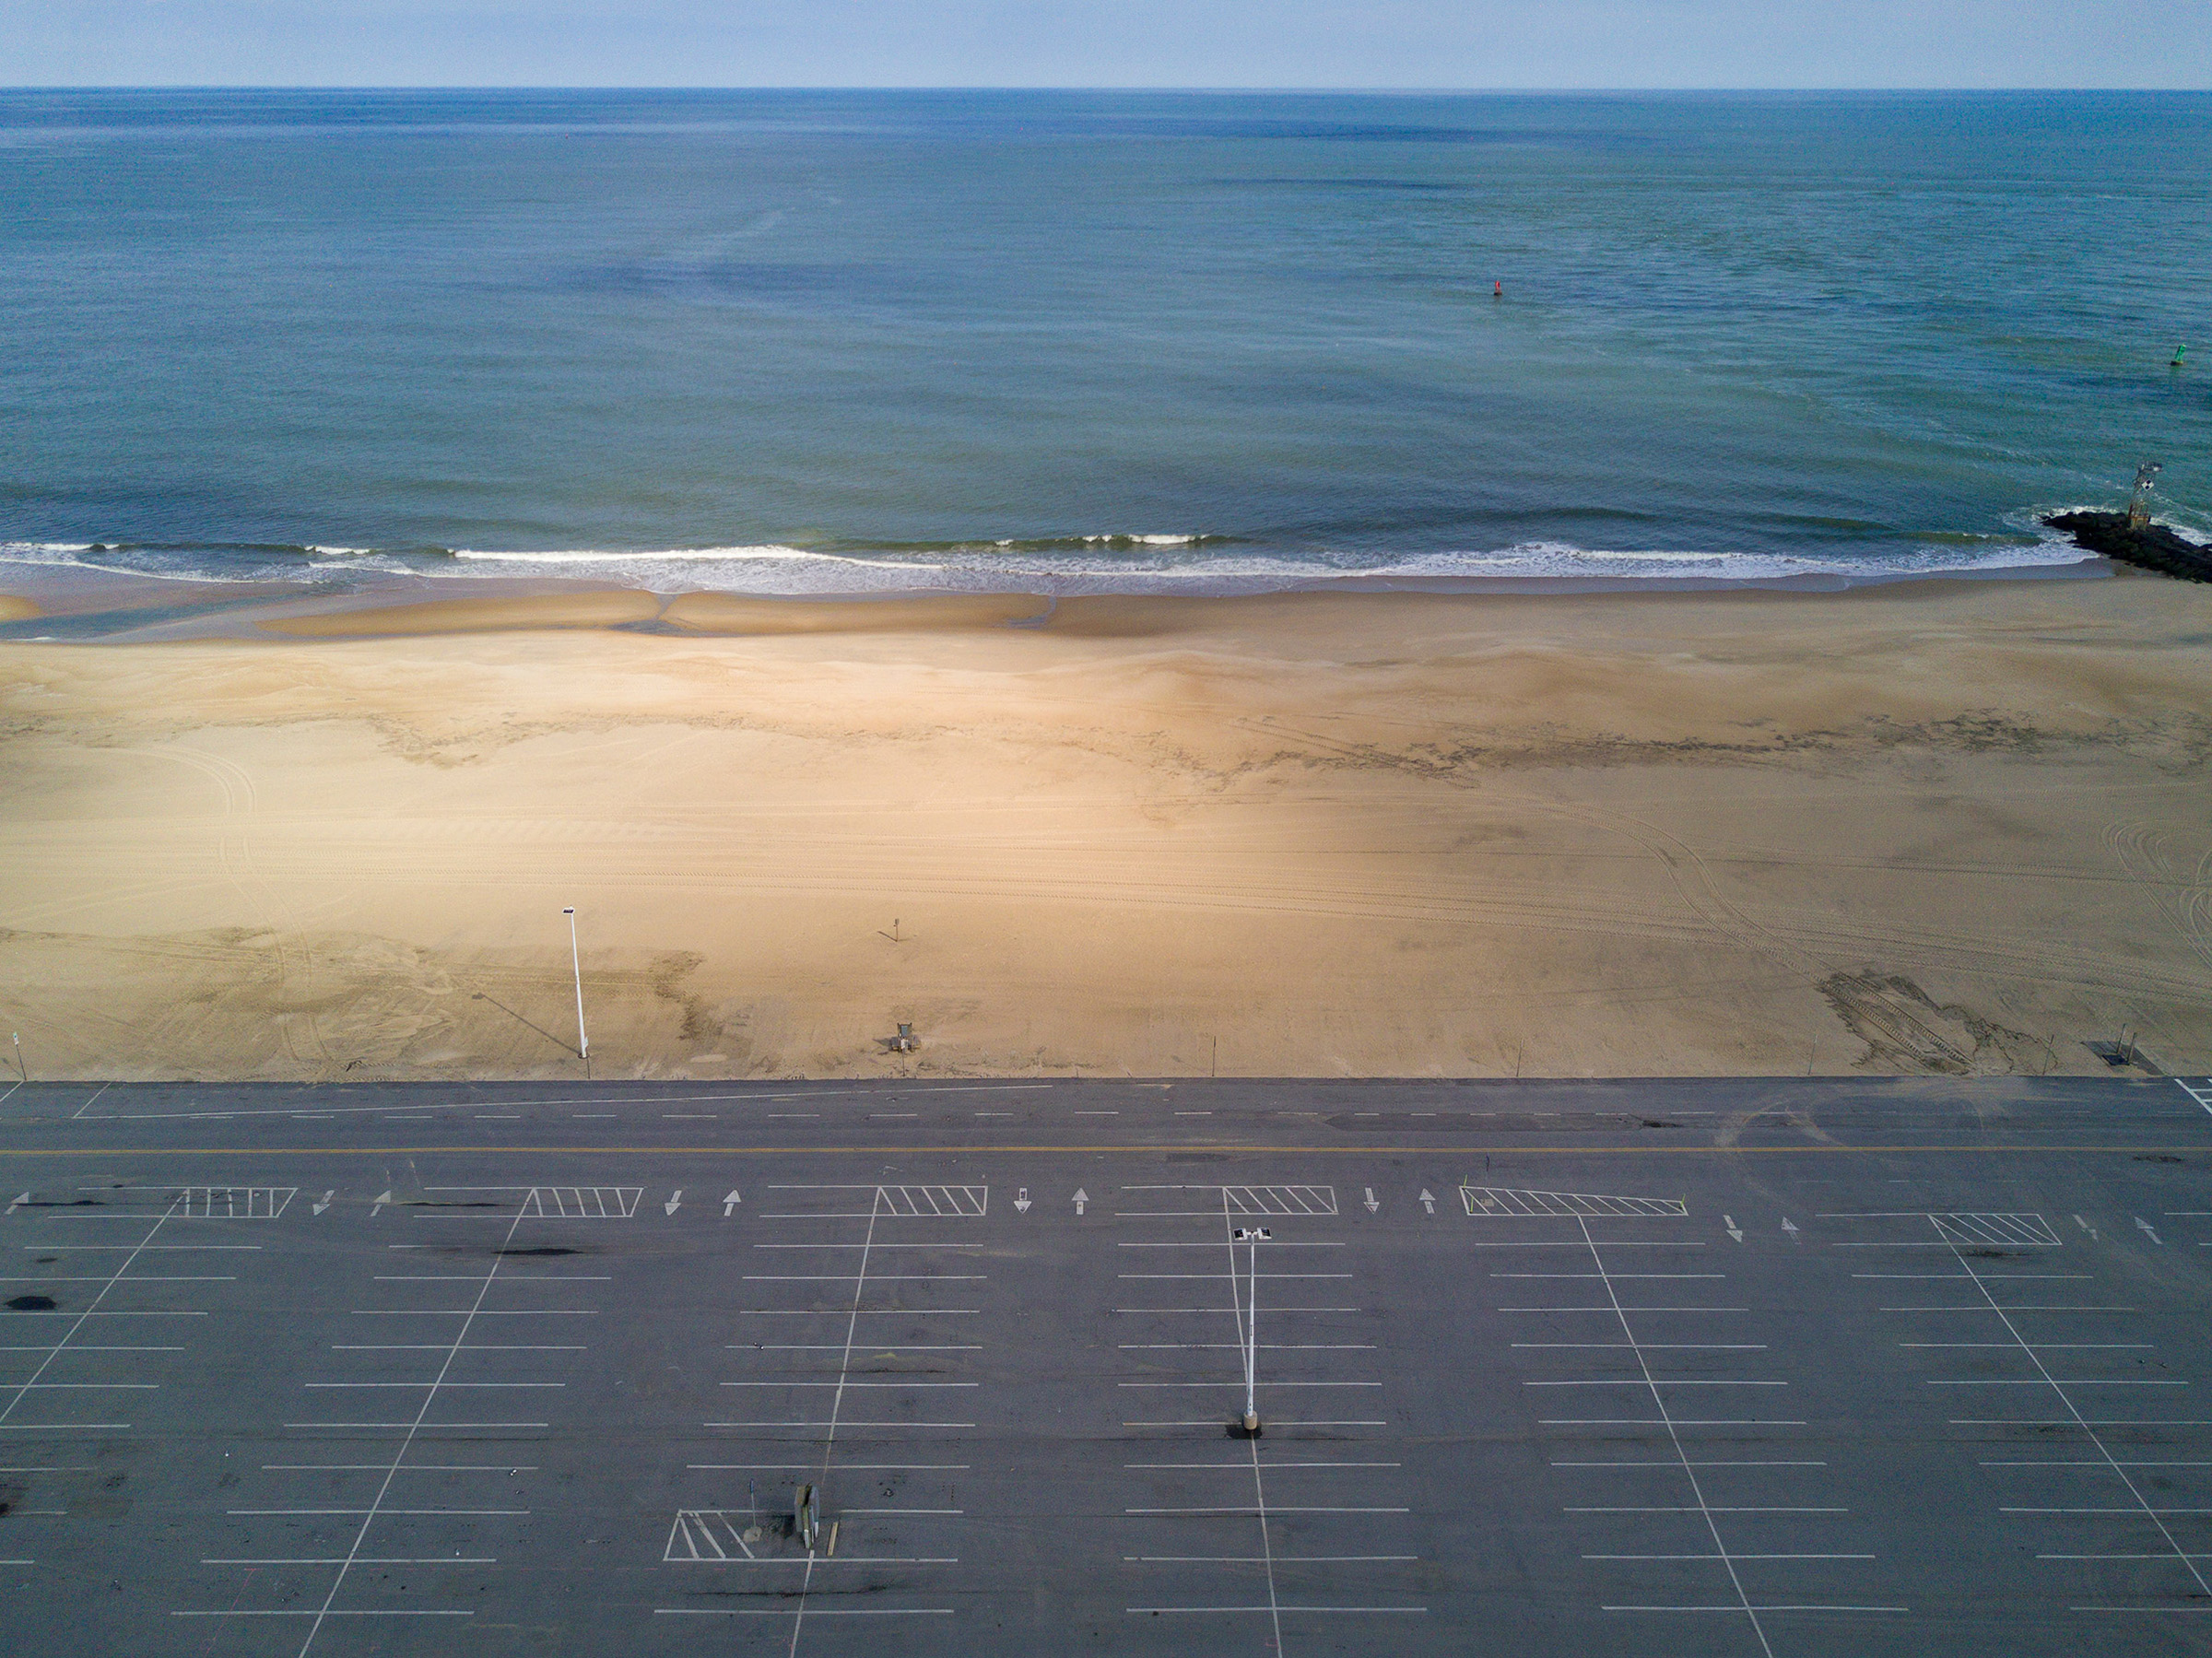 An empty parking lot in the <a href="https://time.com/5829777/governors-reopening-coronavirus/" target="_blank" rel="noopener noreferrer">beach town</a> of Ocean City, Md., on April 16. (Peter van Agtmael—Magnum Photos for TIME)